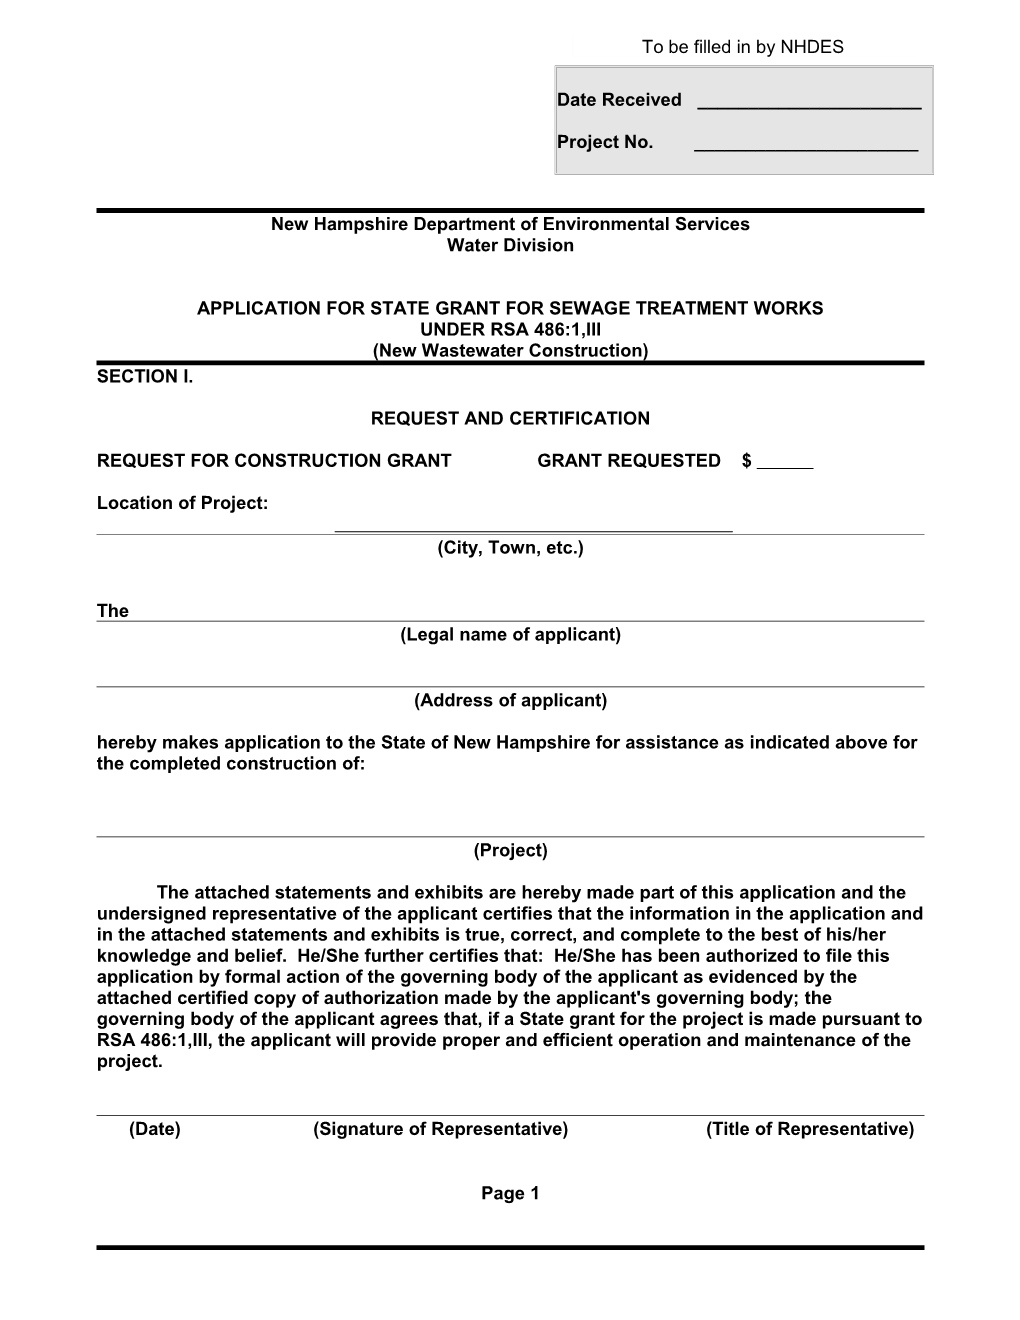 Application for State Grant for Sewage Treatment Works Under RSA 486:1, III (New Wastewater